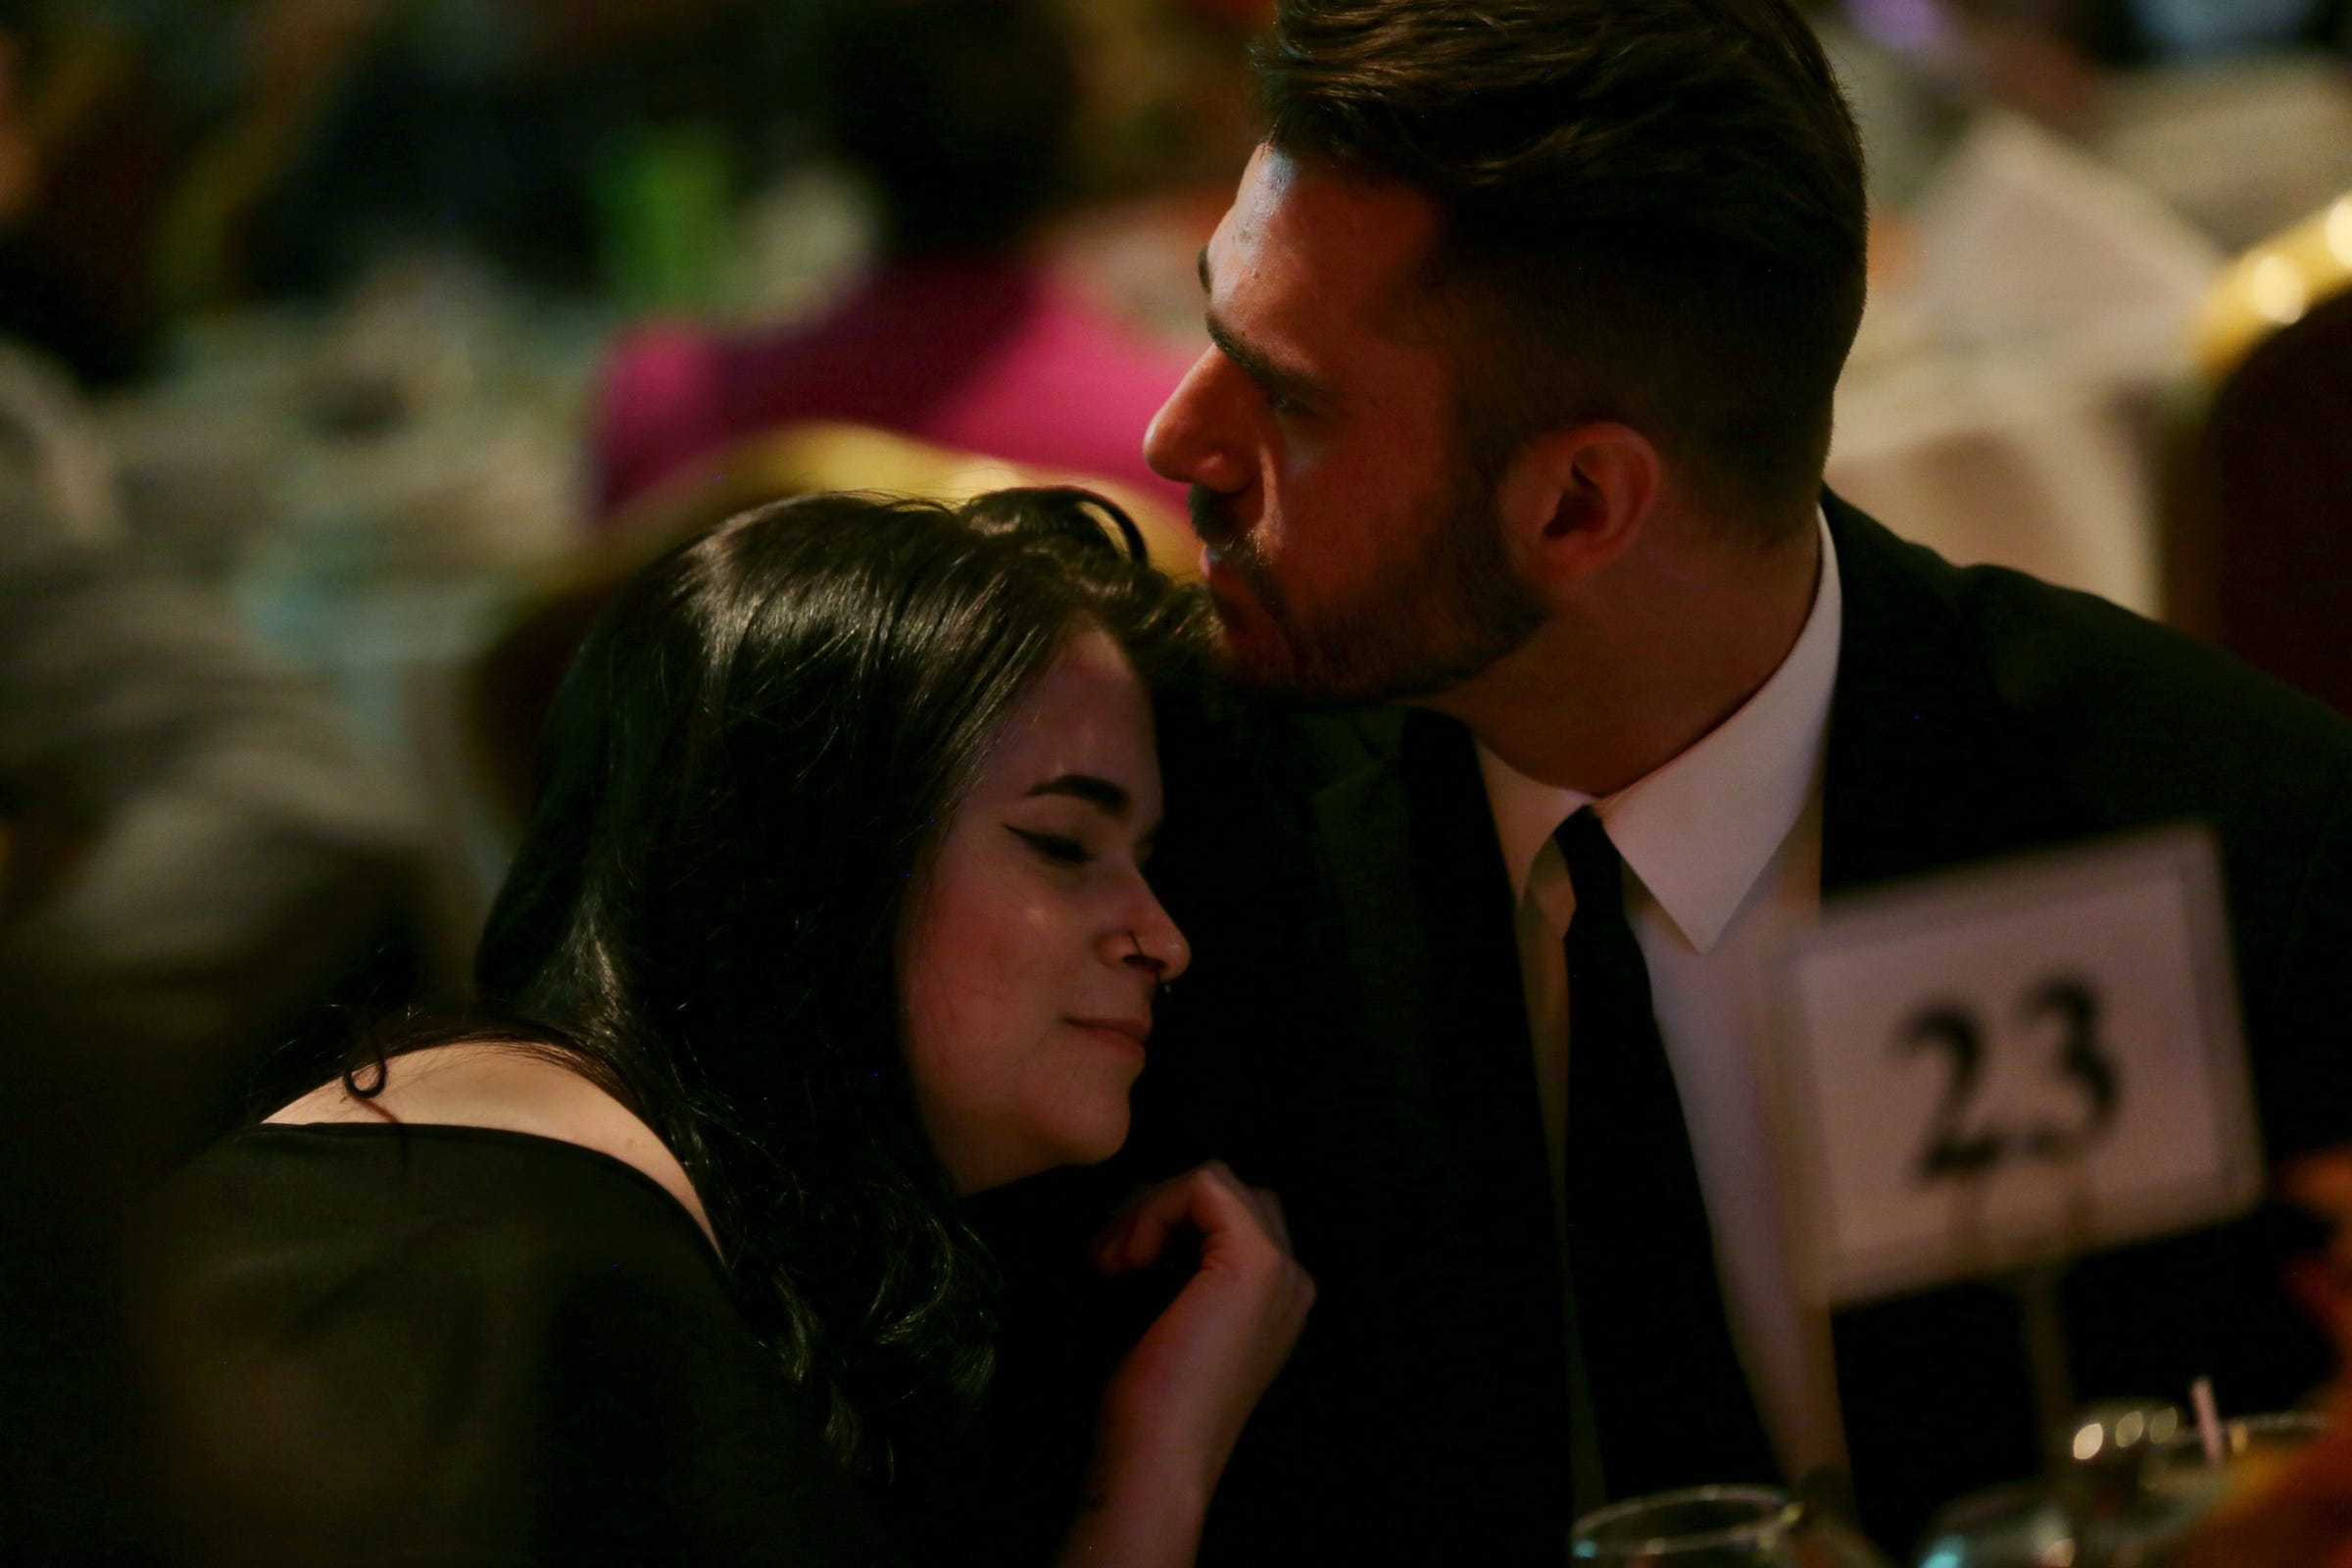 Justin Newman, 29, right who is part of drug treatment court at 41B District Court in Clinton Township gets a hug from his girlfriend after sharing part of his journey through opioid addiction during the 8th Annual Families Against Narcotics Fall Fest dinner fundraiser at Penna's of Sterling Heights.